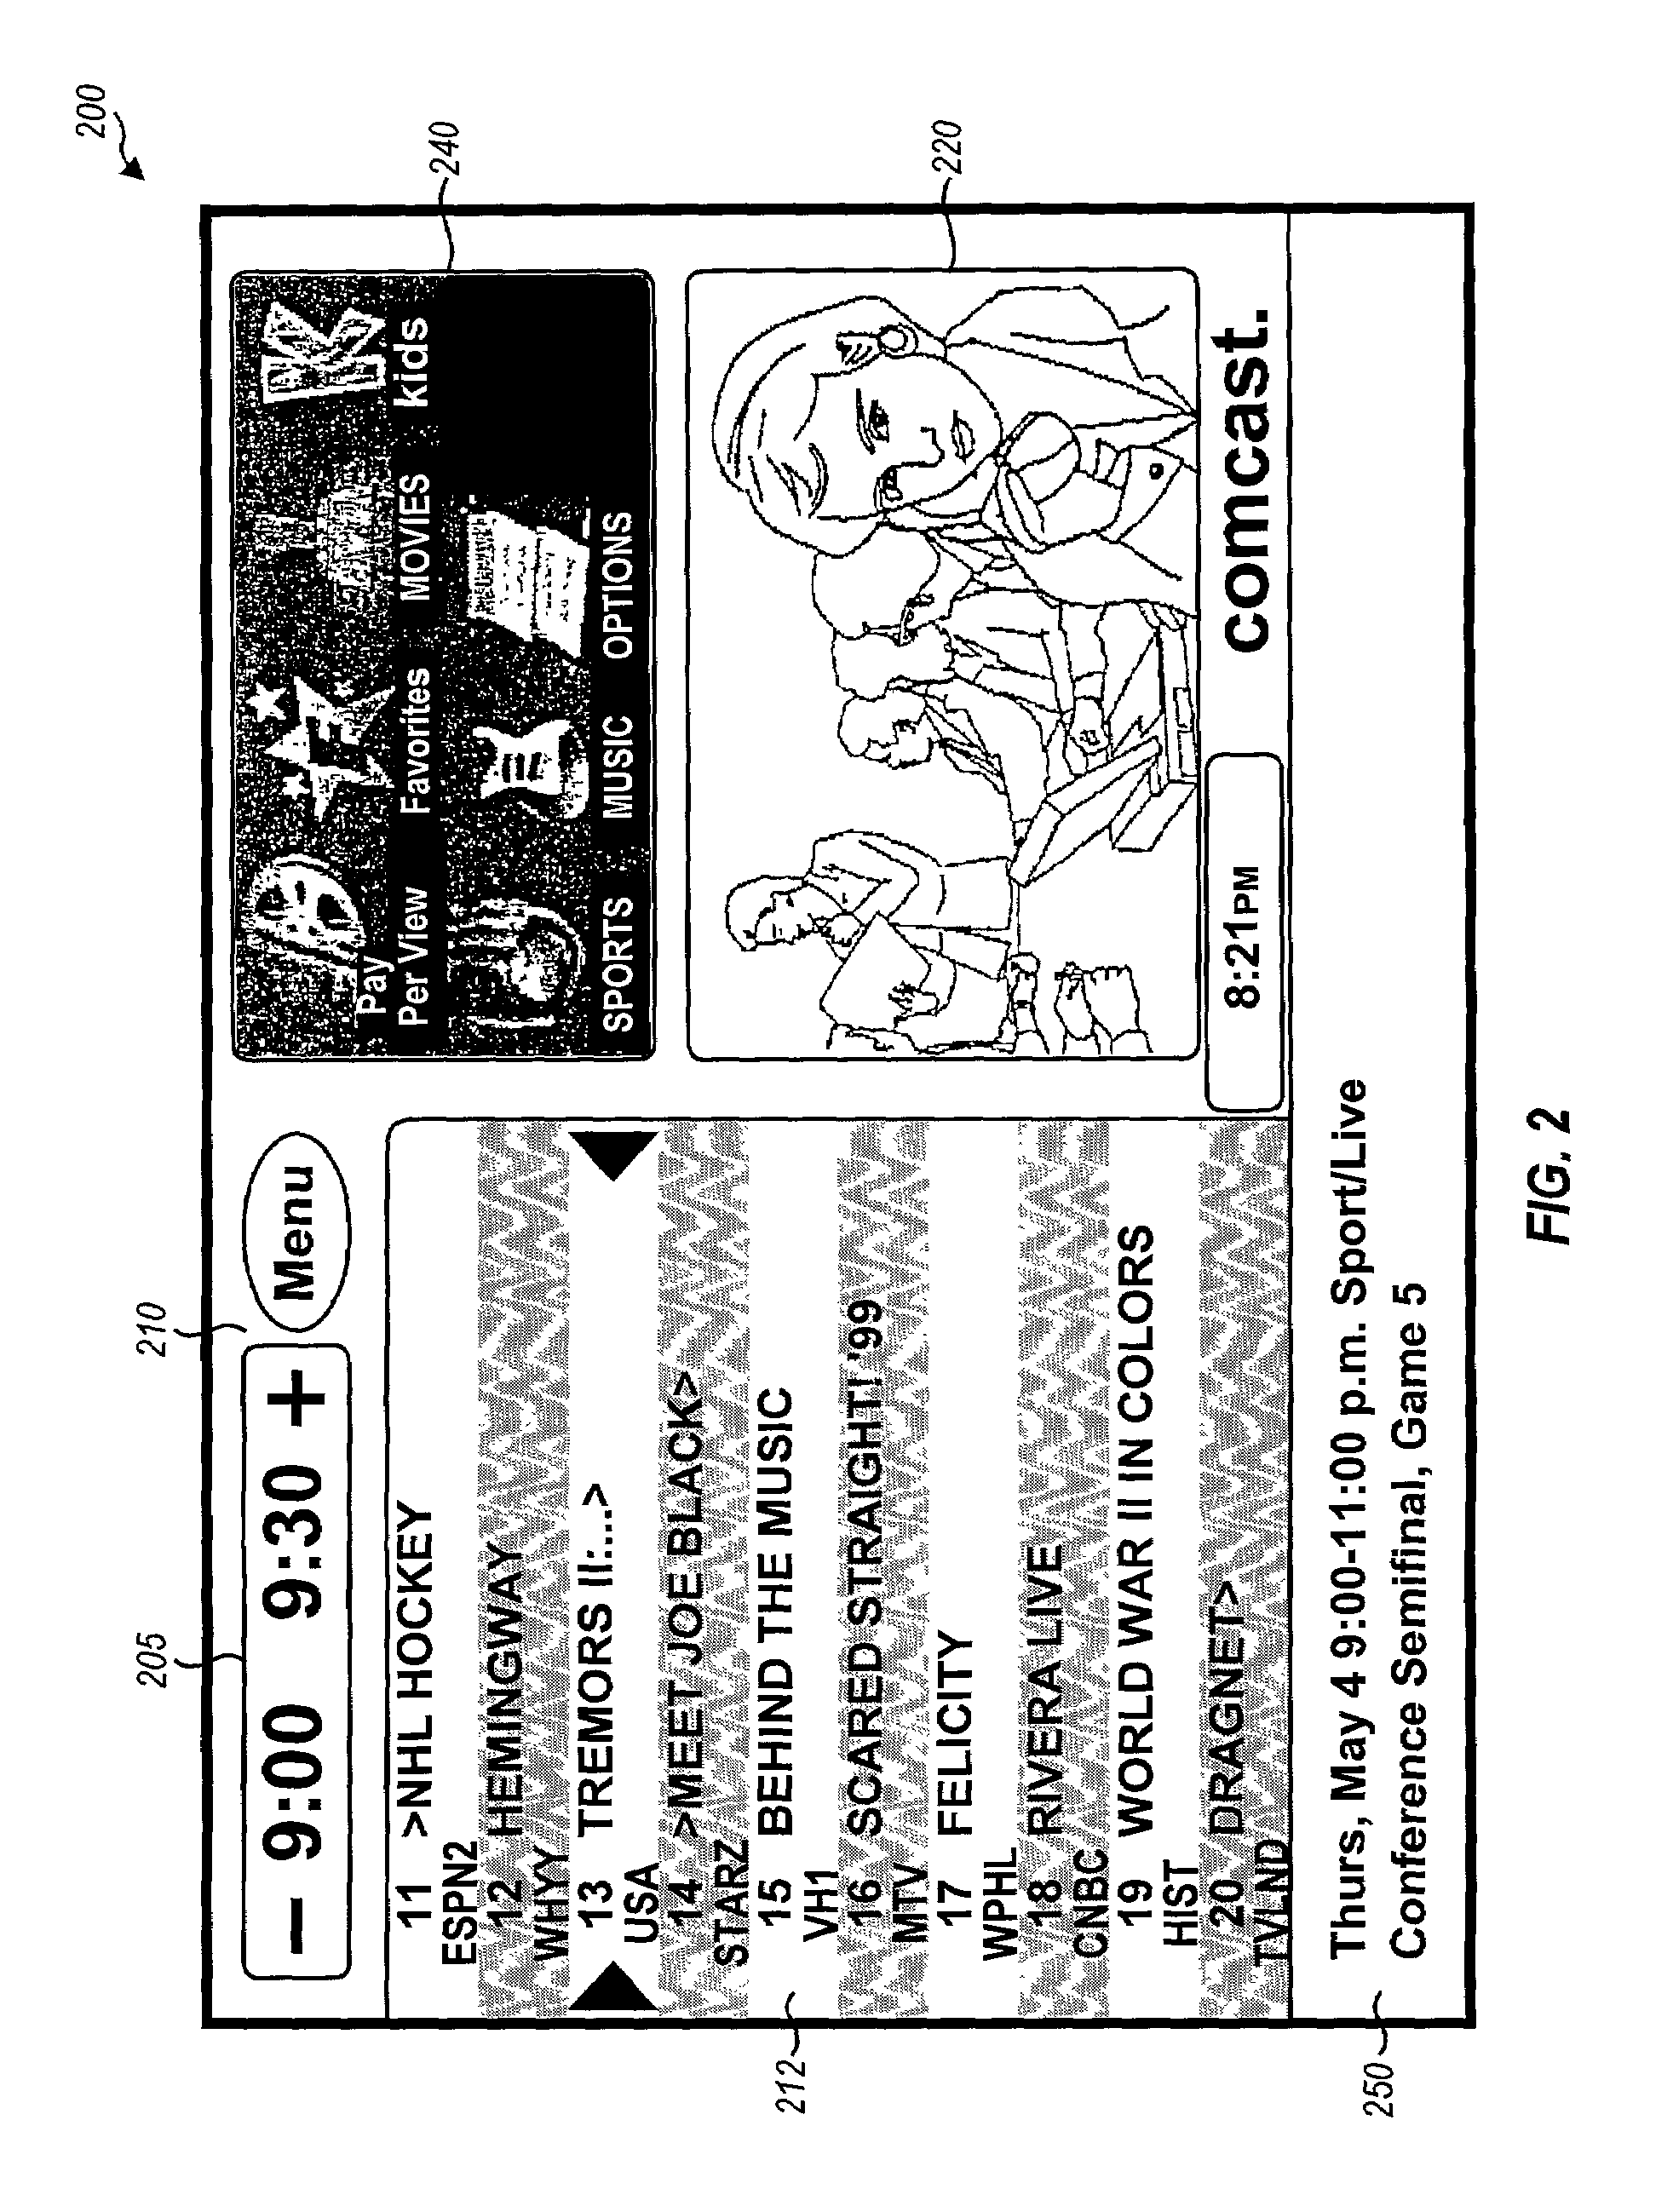 Method and apparatus for performing sub-picture level splicing based on interrupts